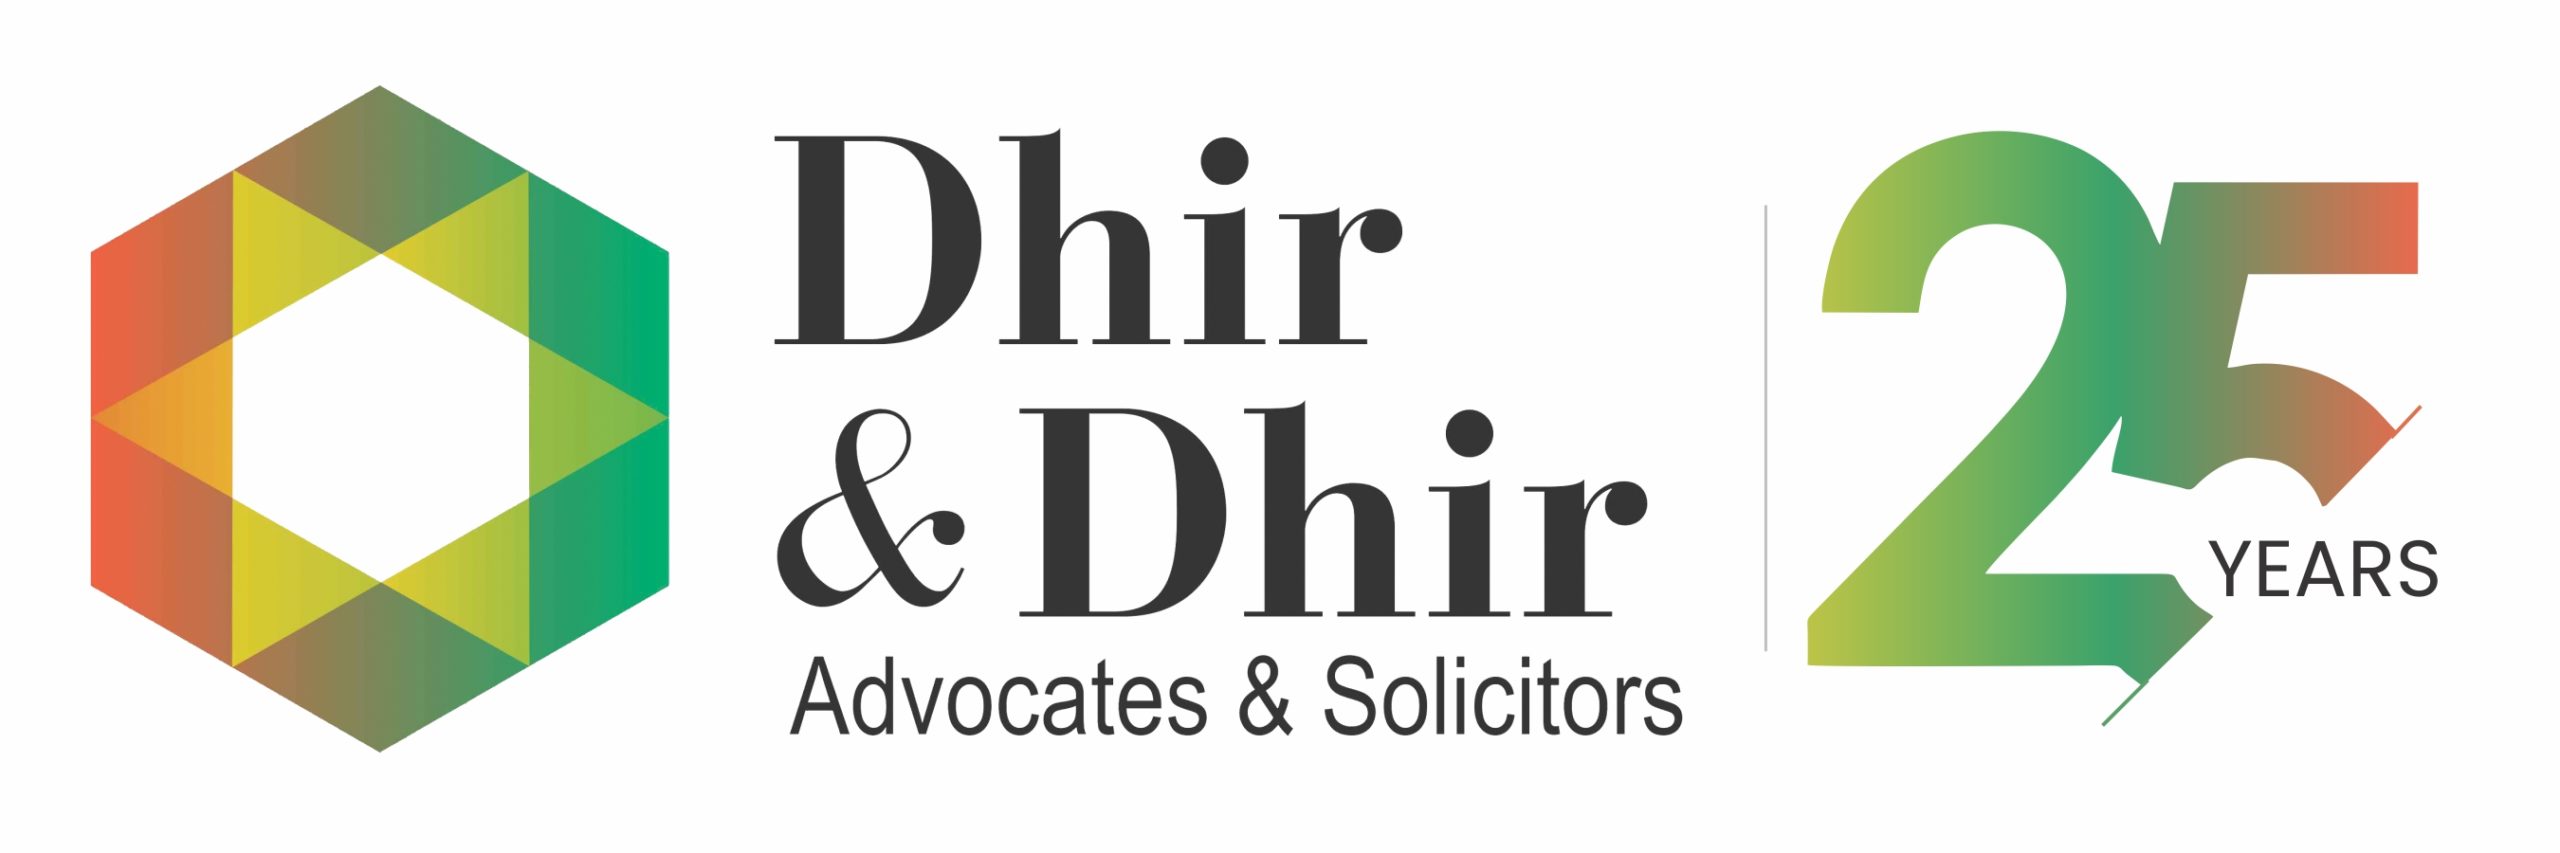 top lawyers & law firms in delhi - dhir & dhir associates - law firm delhi ,india law firm ,law firms india,top legal firms in mumbai ,dhir & dhir associates